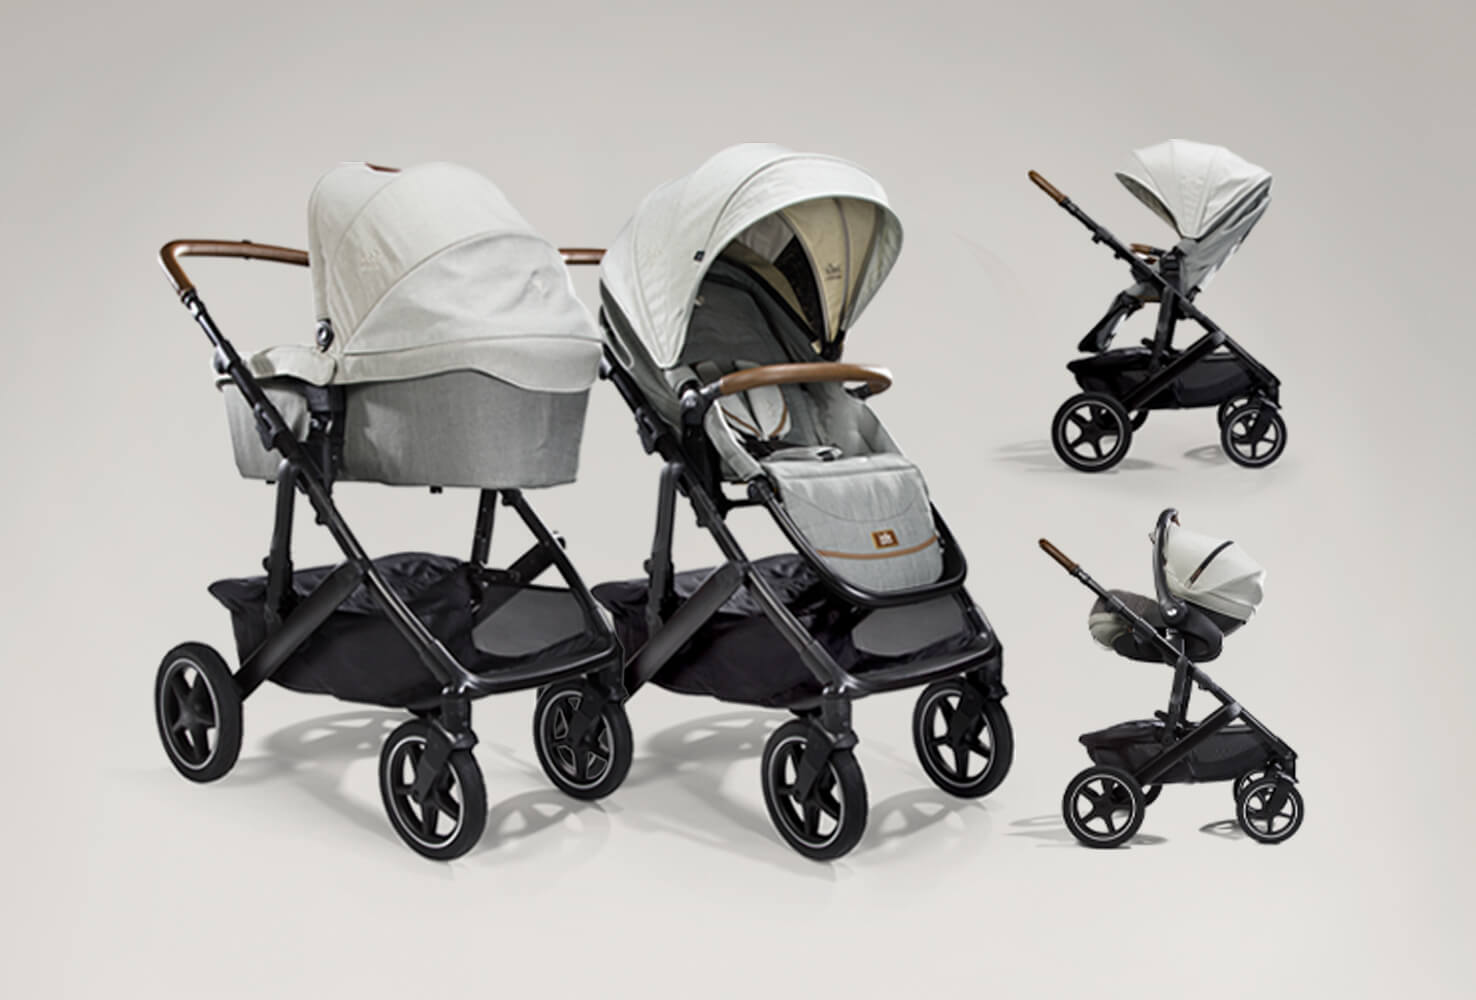 Vinca pram shown in it’s four modes carry cot, infant carrier, forward and parent facing